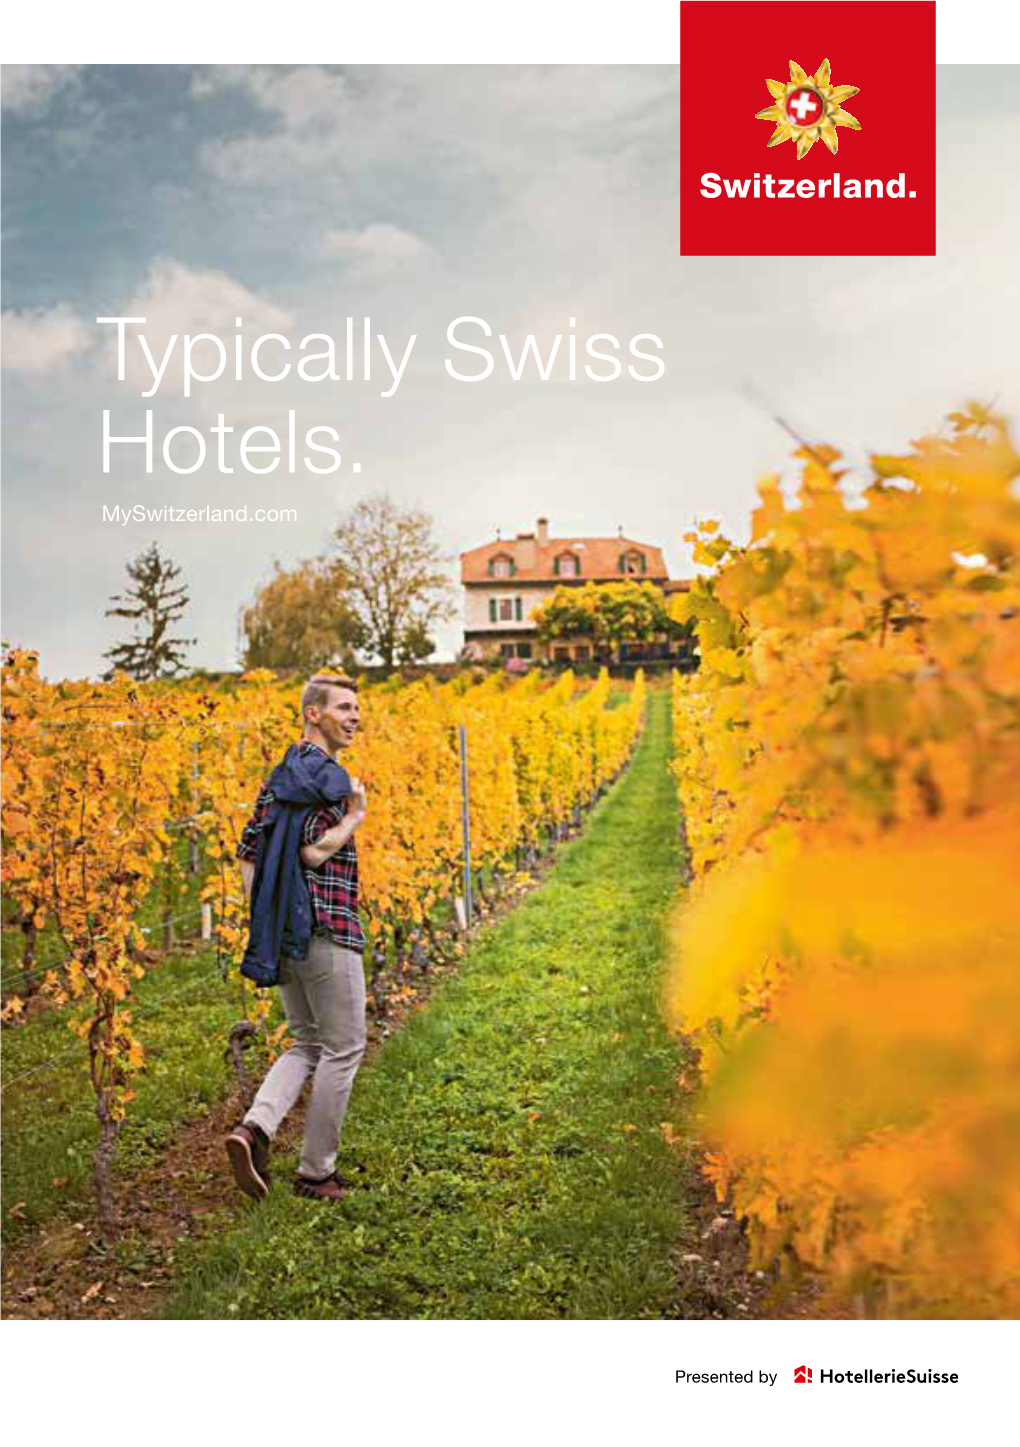 Typically Swiss Hotels